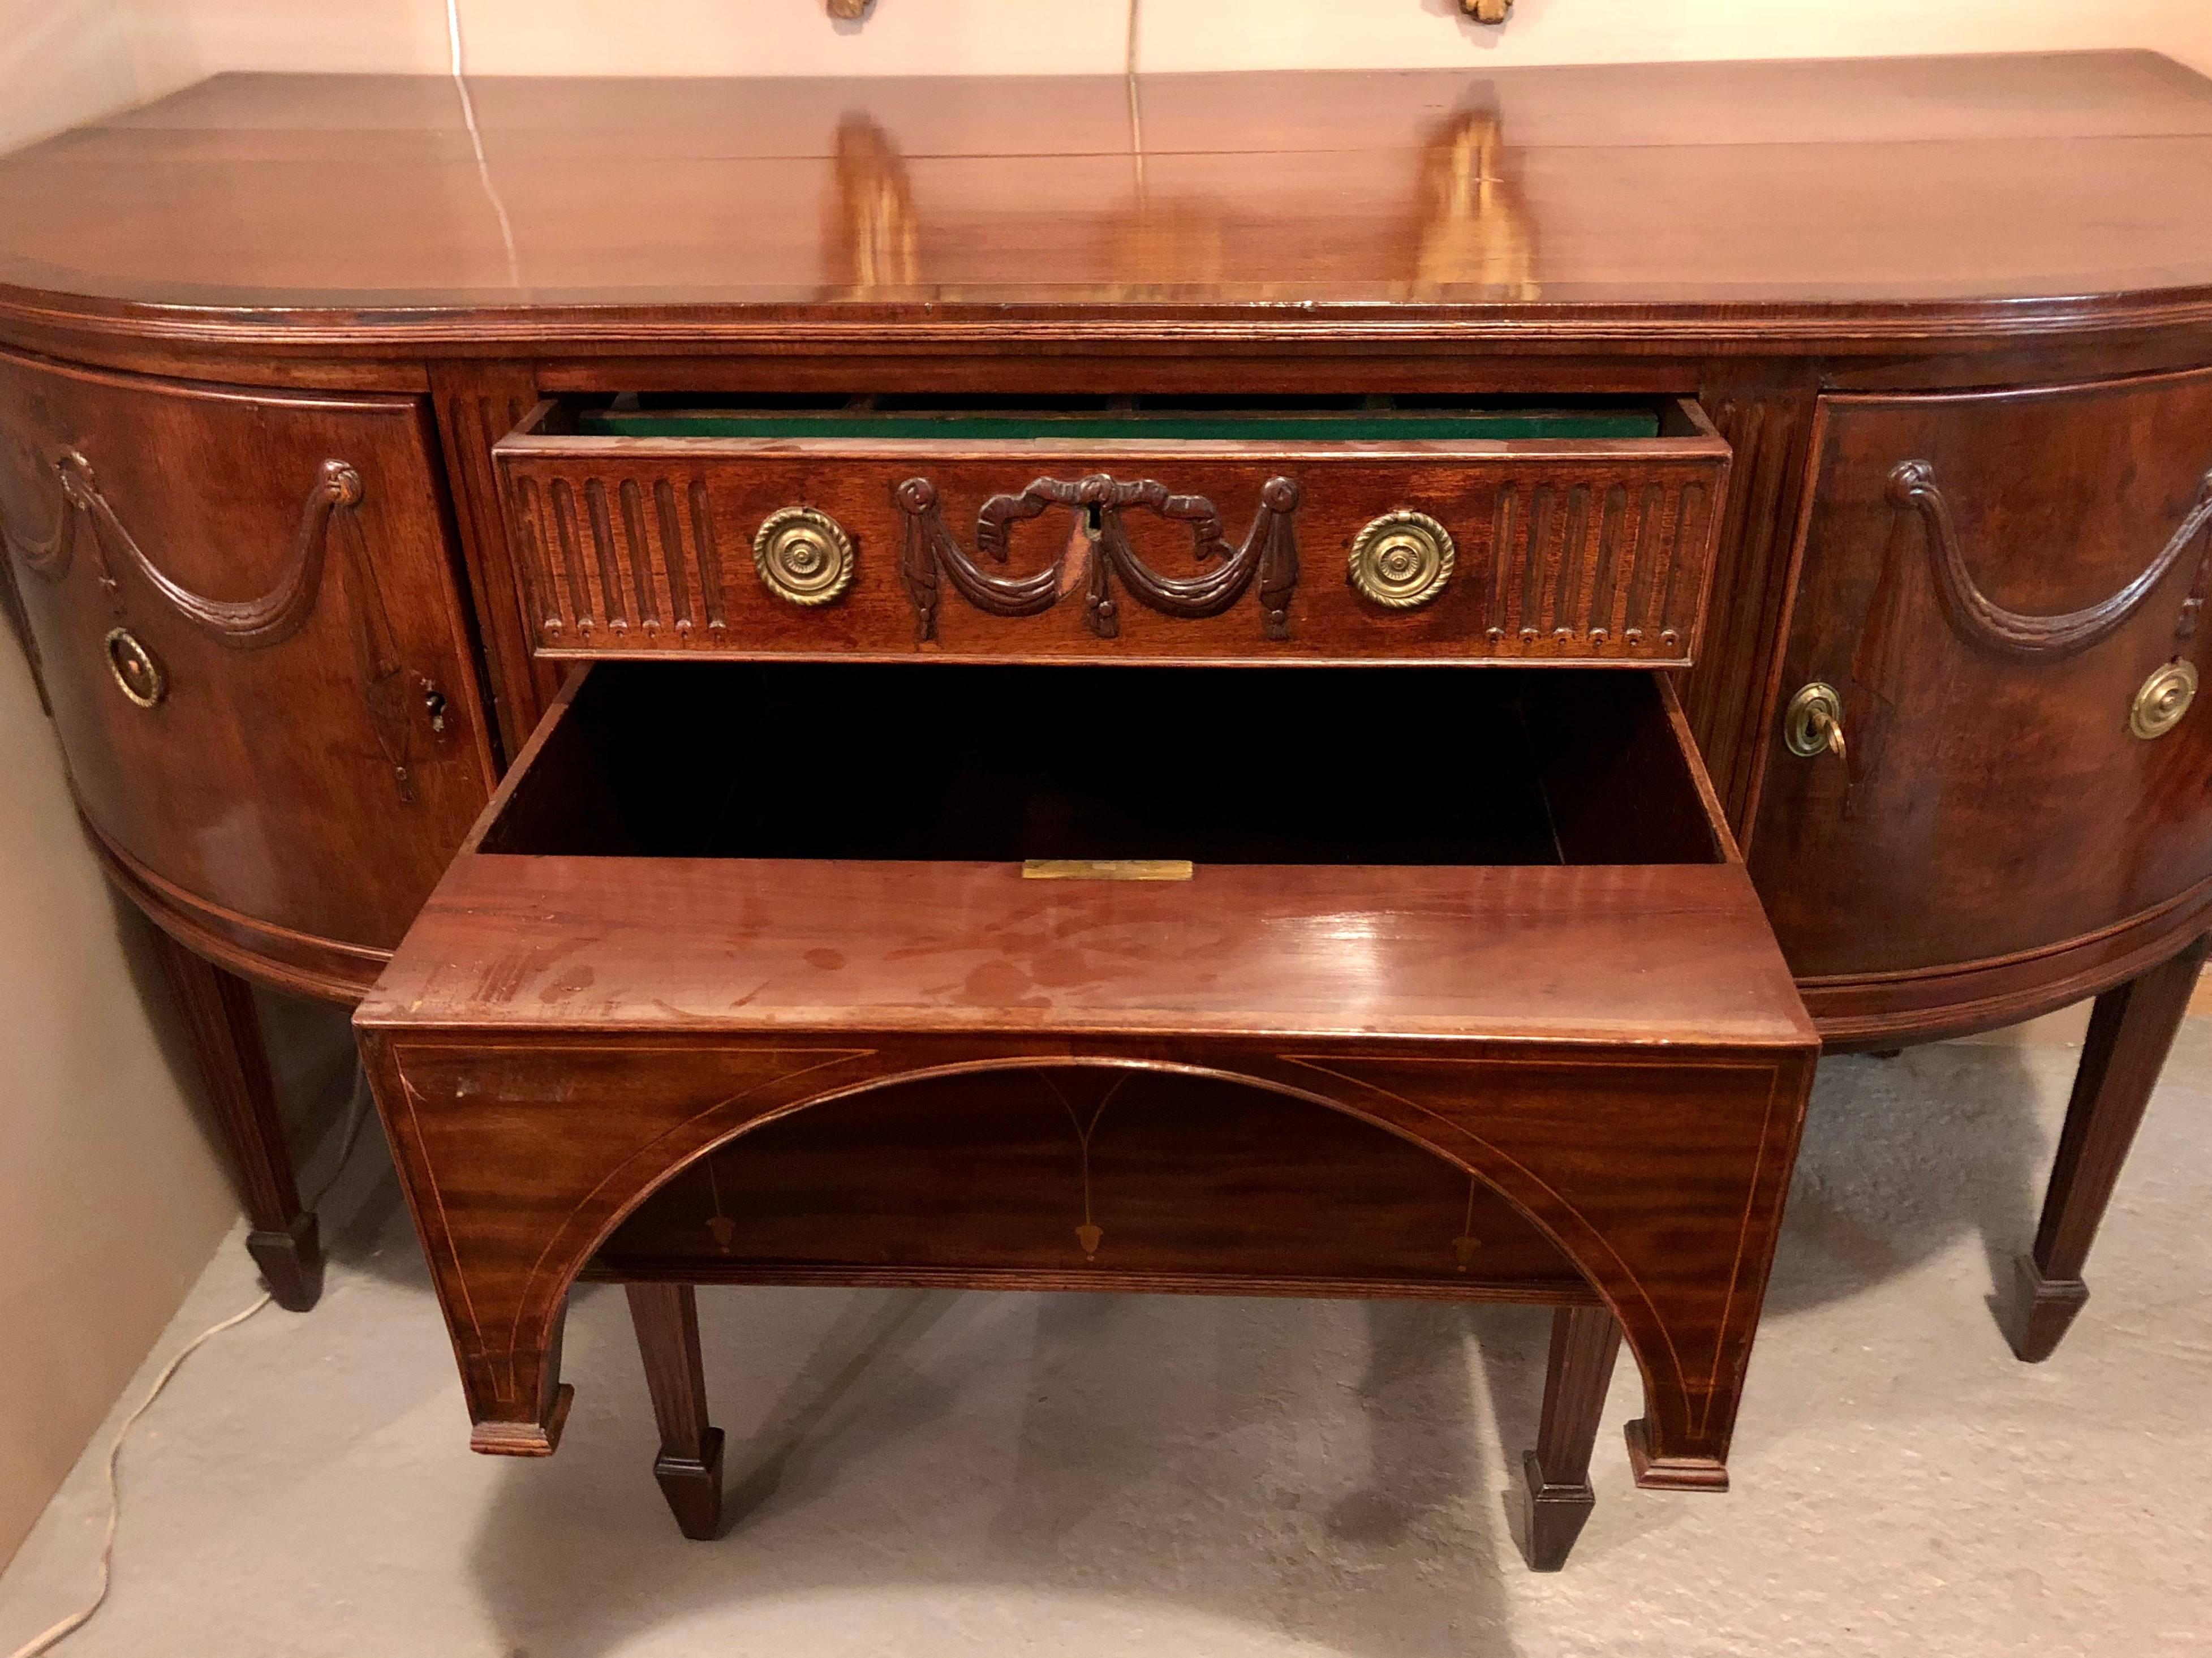 Mahogany Georgian Period Demilune Sideboard or Serving Table Breakfront